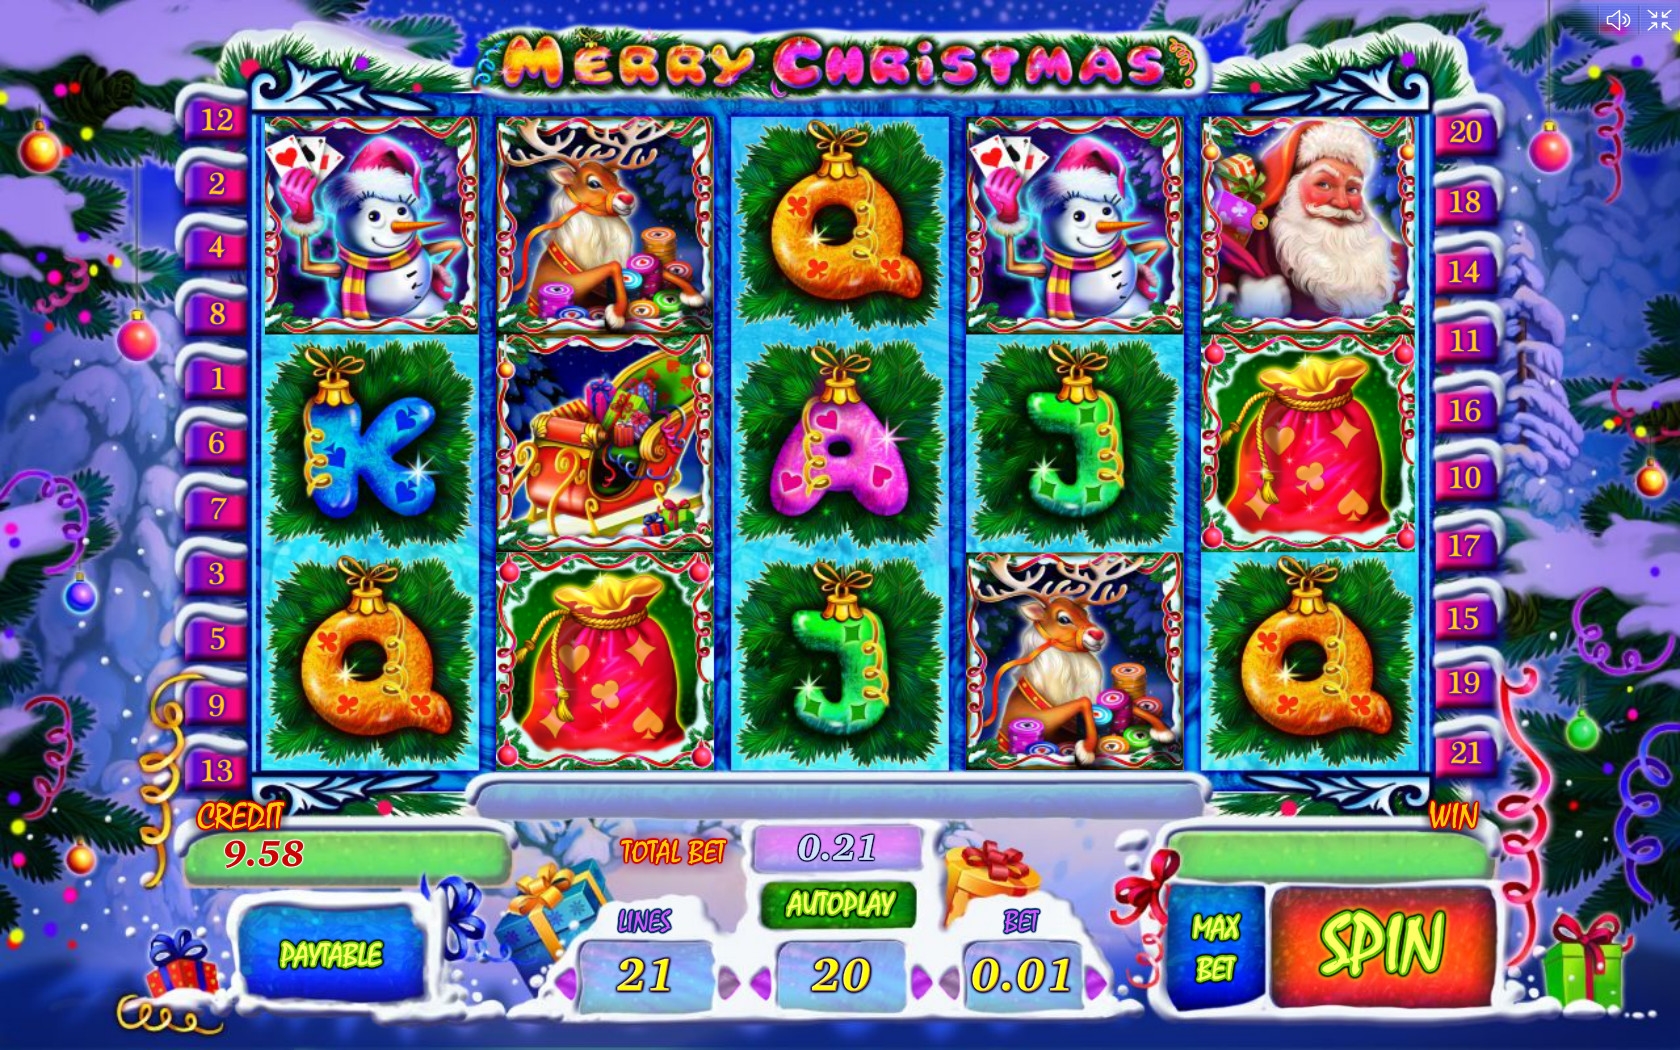 Merry Christmas (Merry Christmas) from category Slots